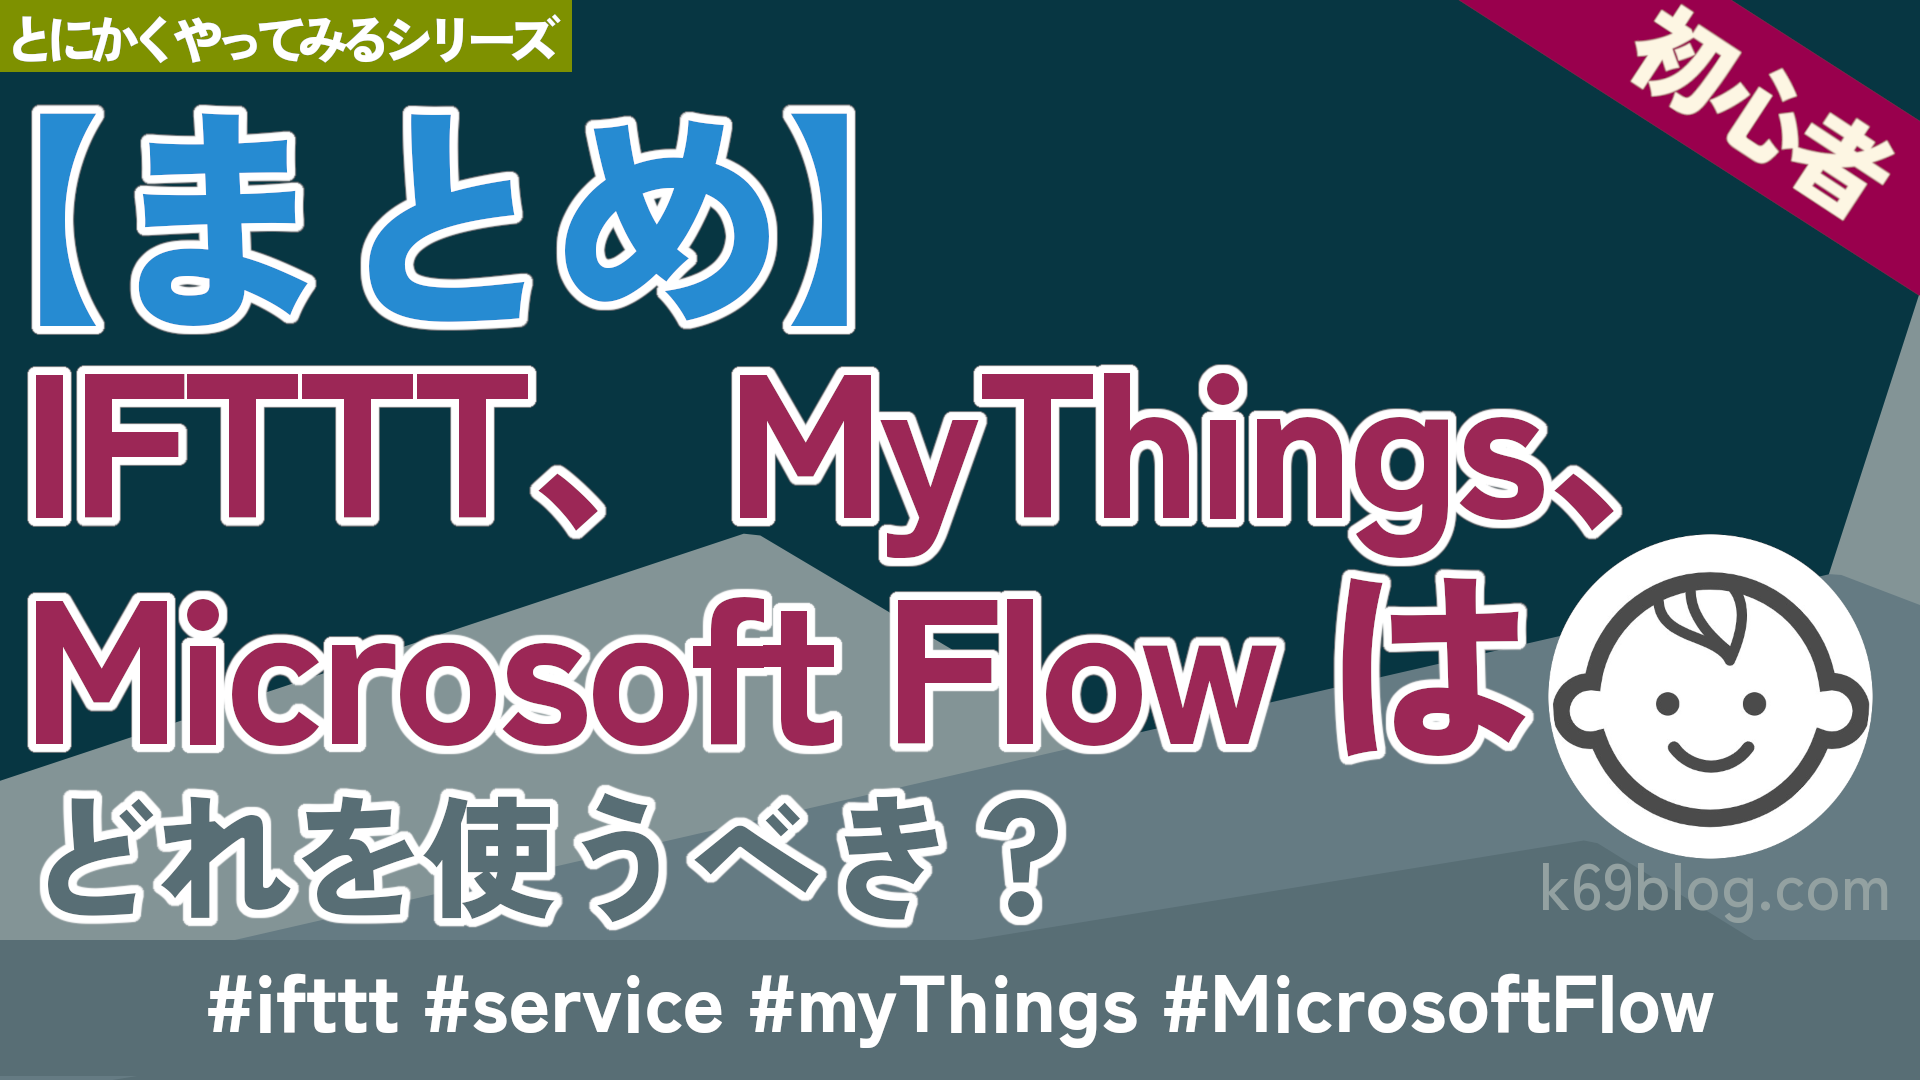 Cover Image for 【まとめ】IFTTT、MyThings、Microsoft Flow はどれを使うべき？